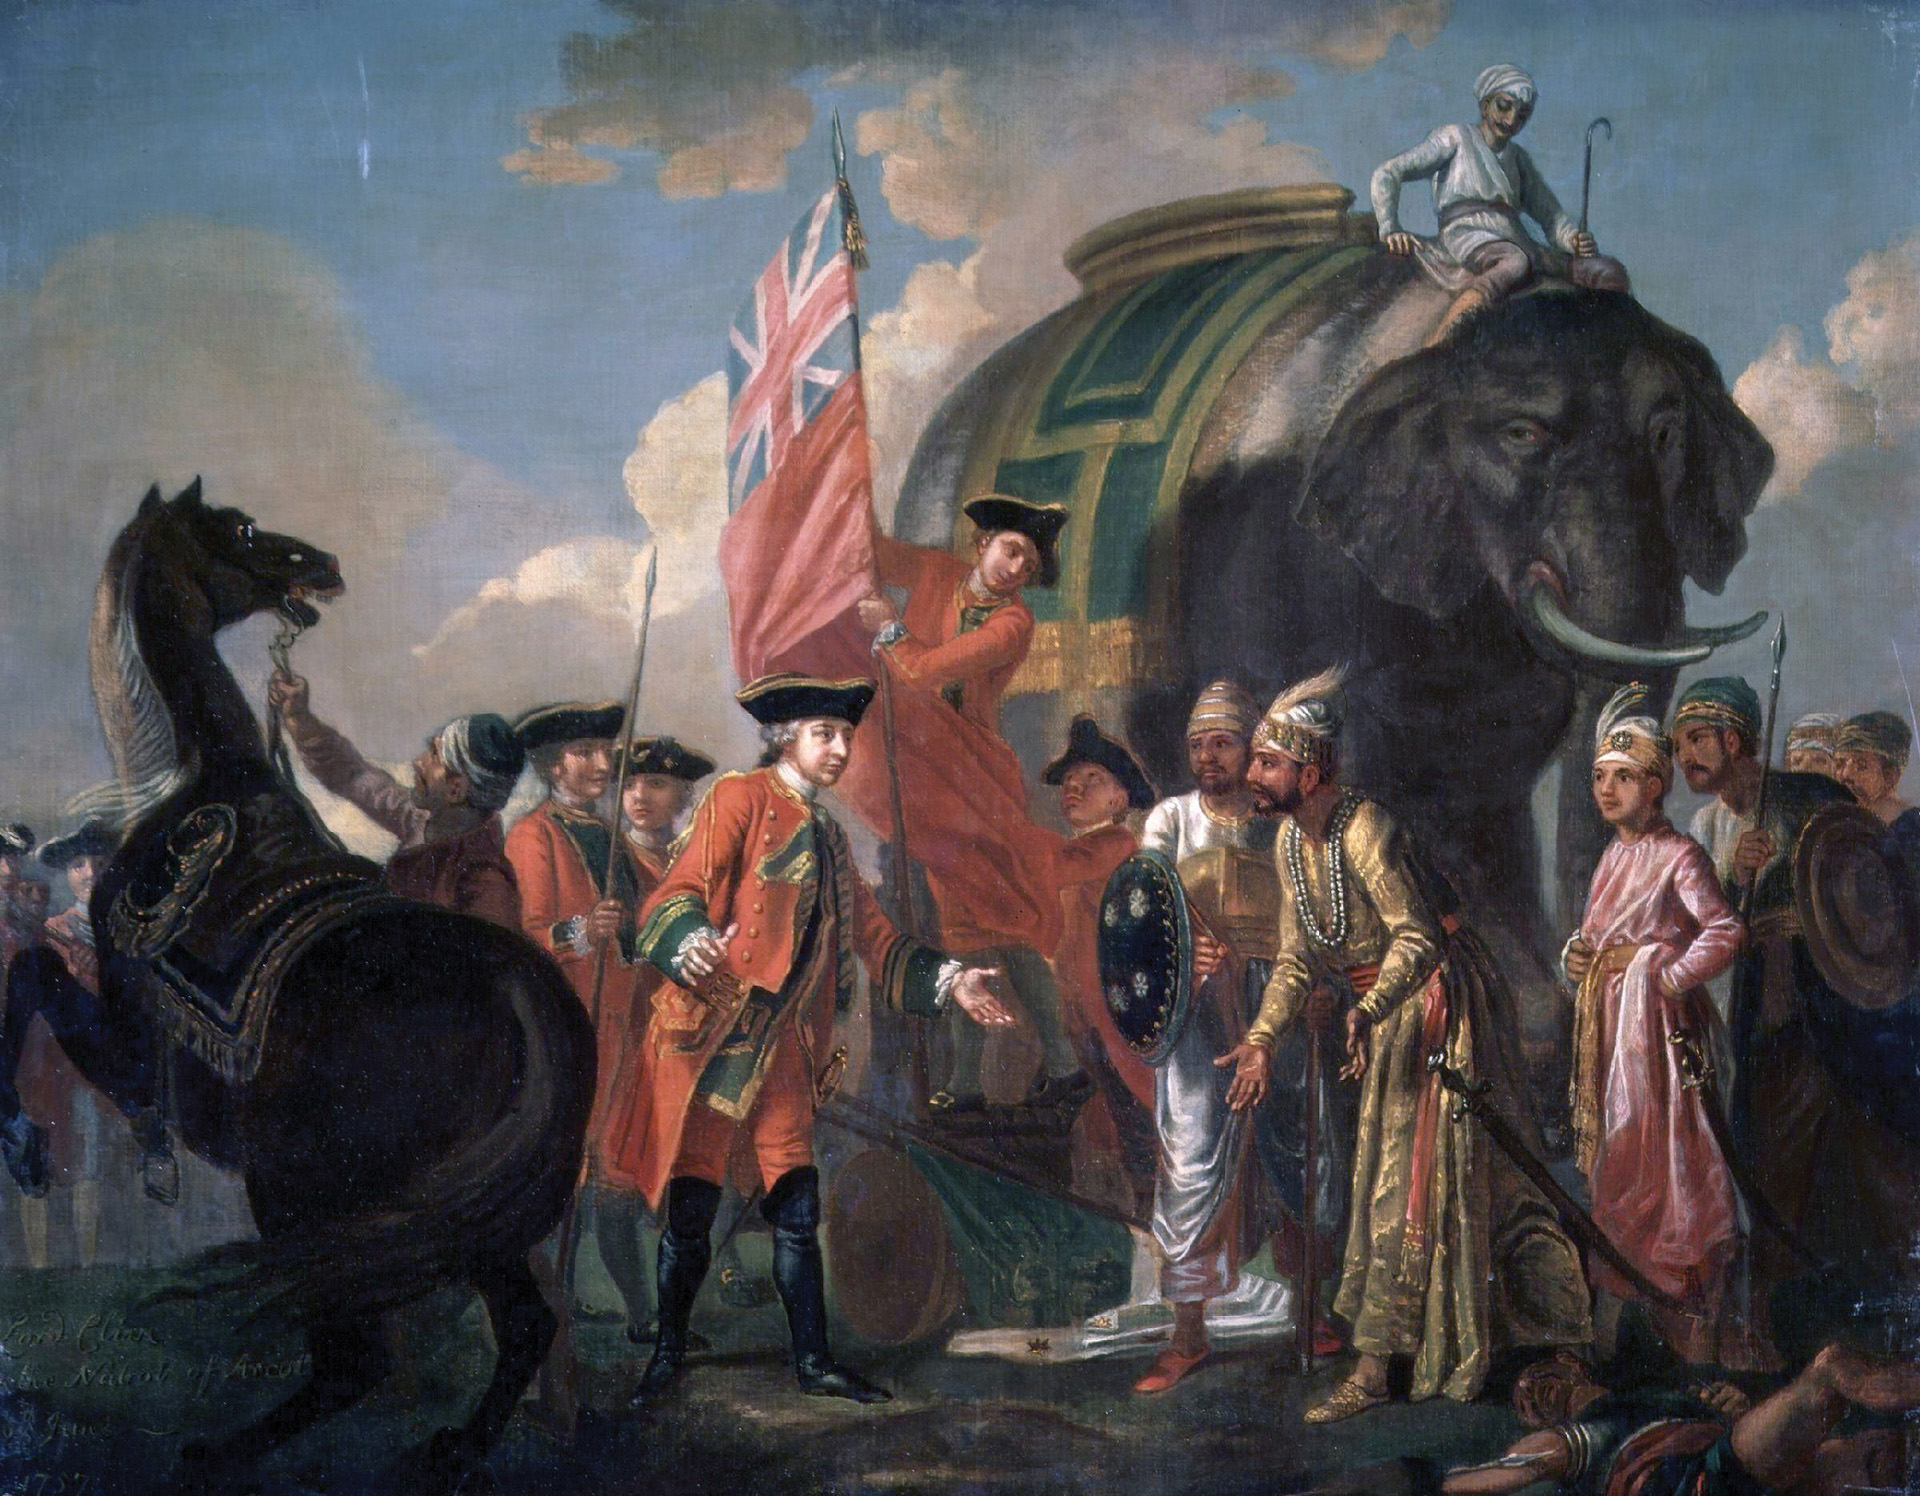 Colonel Clive’s small army was nearly encircled by the Nawab’s mighty host at Plassey. But what they lacked in numbers, the British made up for in leadership and fighting spirit.